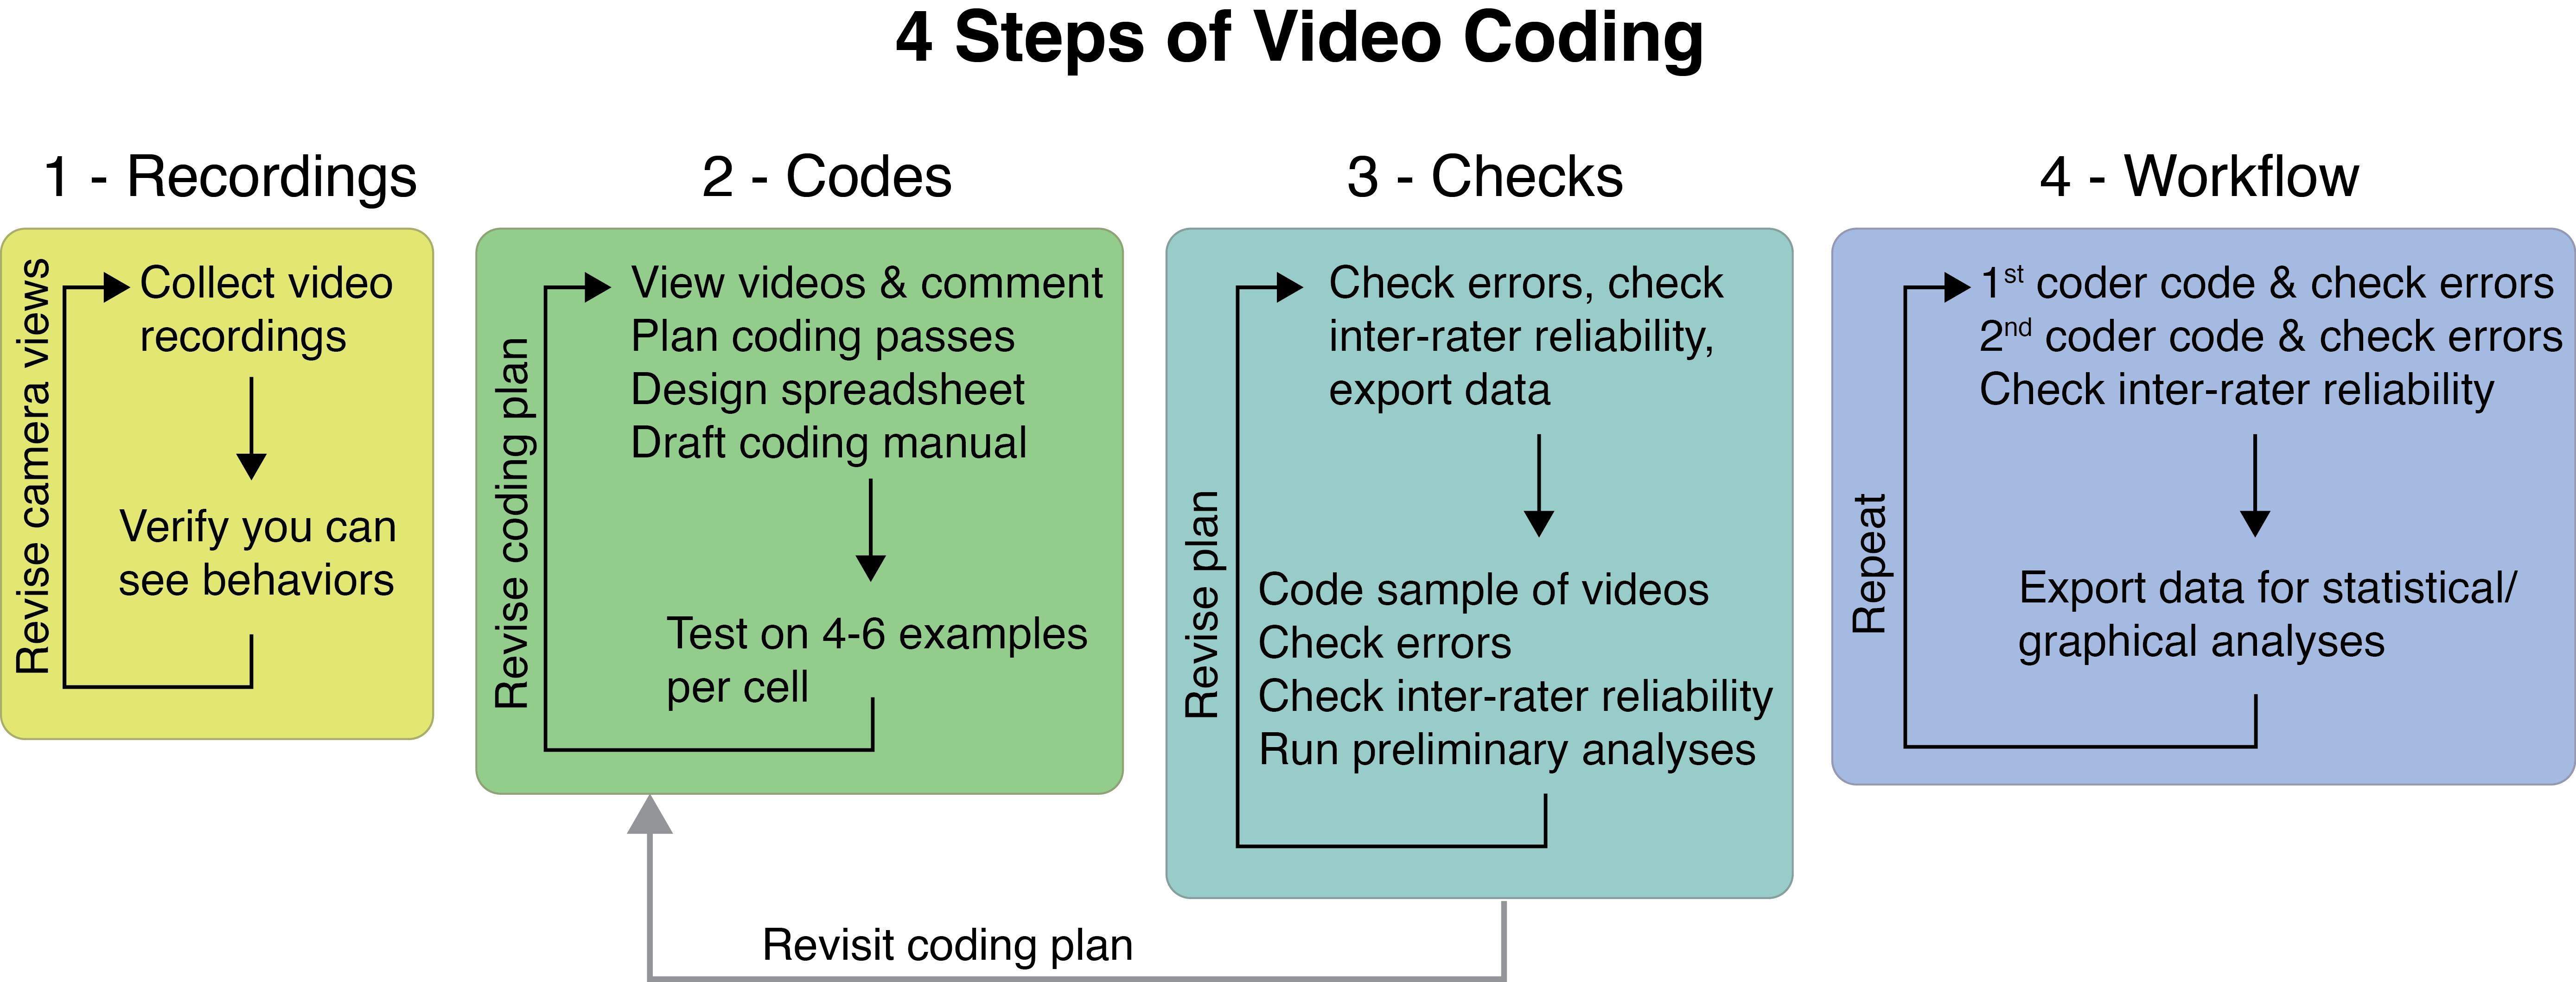 4 steps of video coding